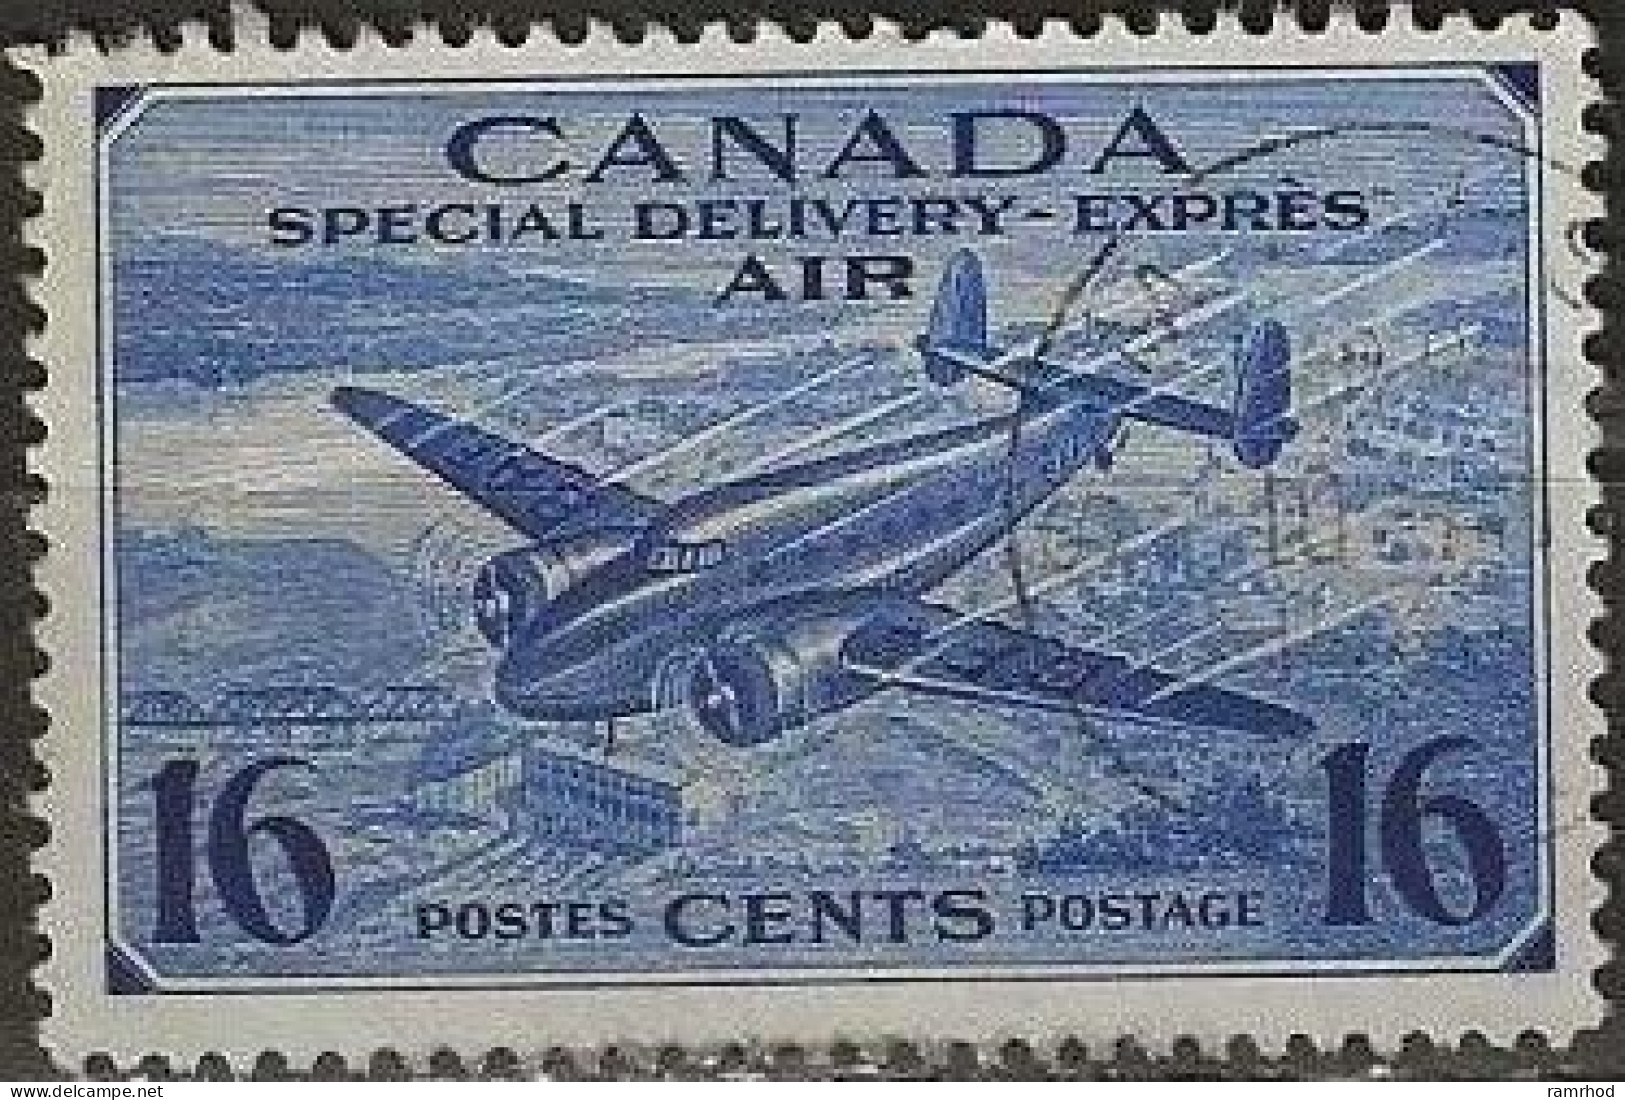 CANADA 1942 Special Delivery - Lockheed L18 Lodestar - 16c. - Blue (air) FU - Exprès